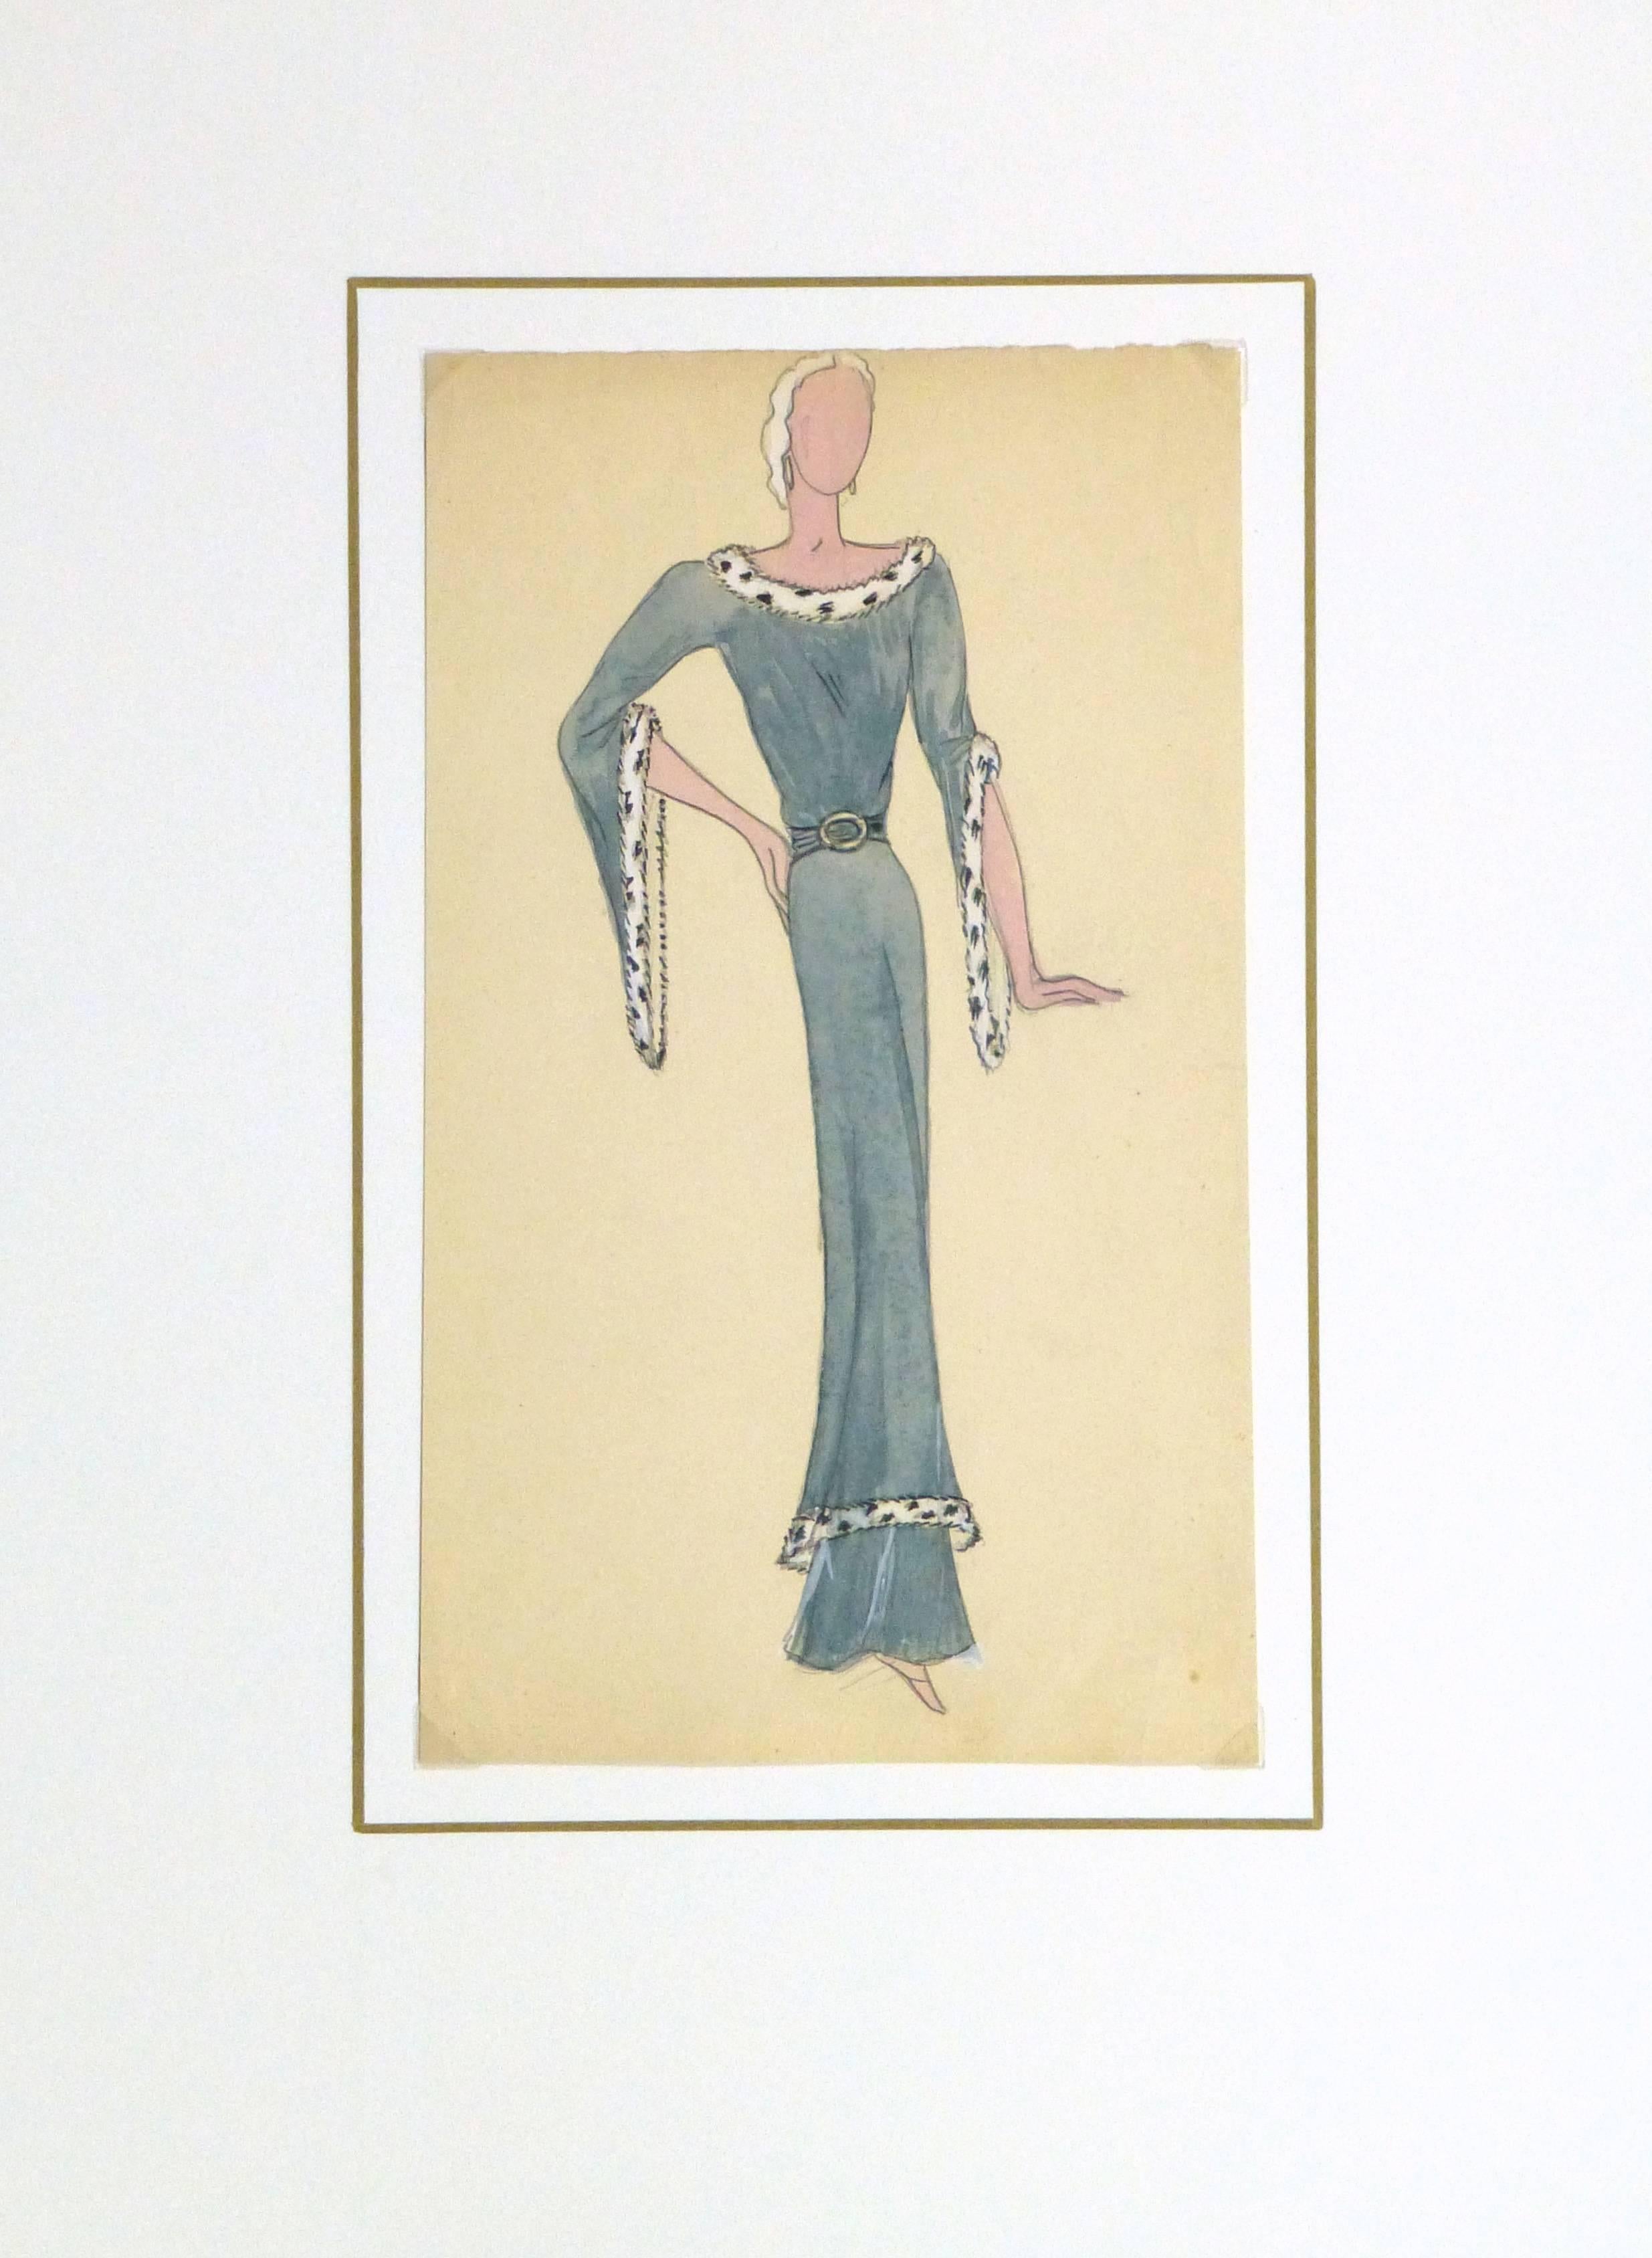 Unique pencil and gouache fashion sketch of a slim and flowing blue evening dress trimmed in white fur, circa 1930.

Original artwork on paper displayed on a white mat with a gold border. Archival plastic sleeve and Certificate of Authenticity